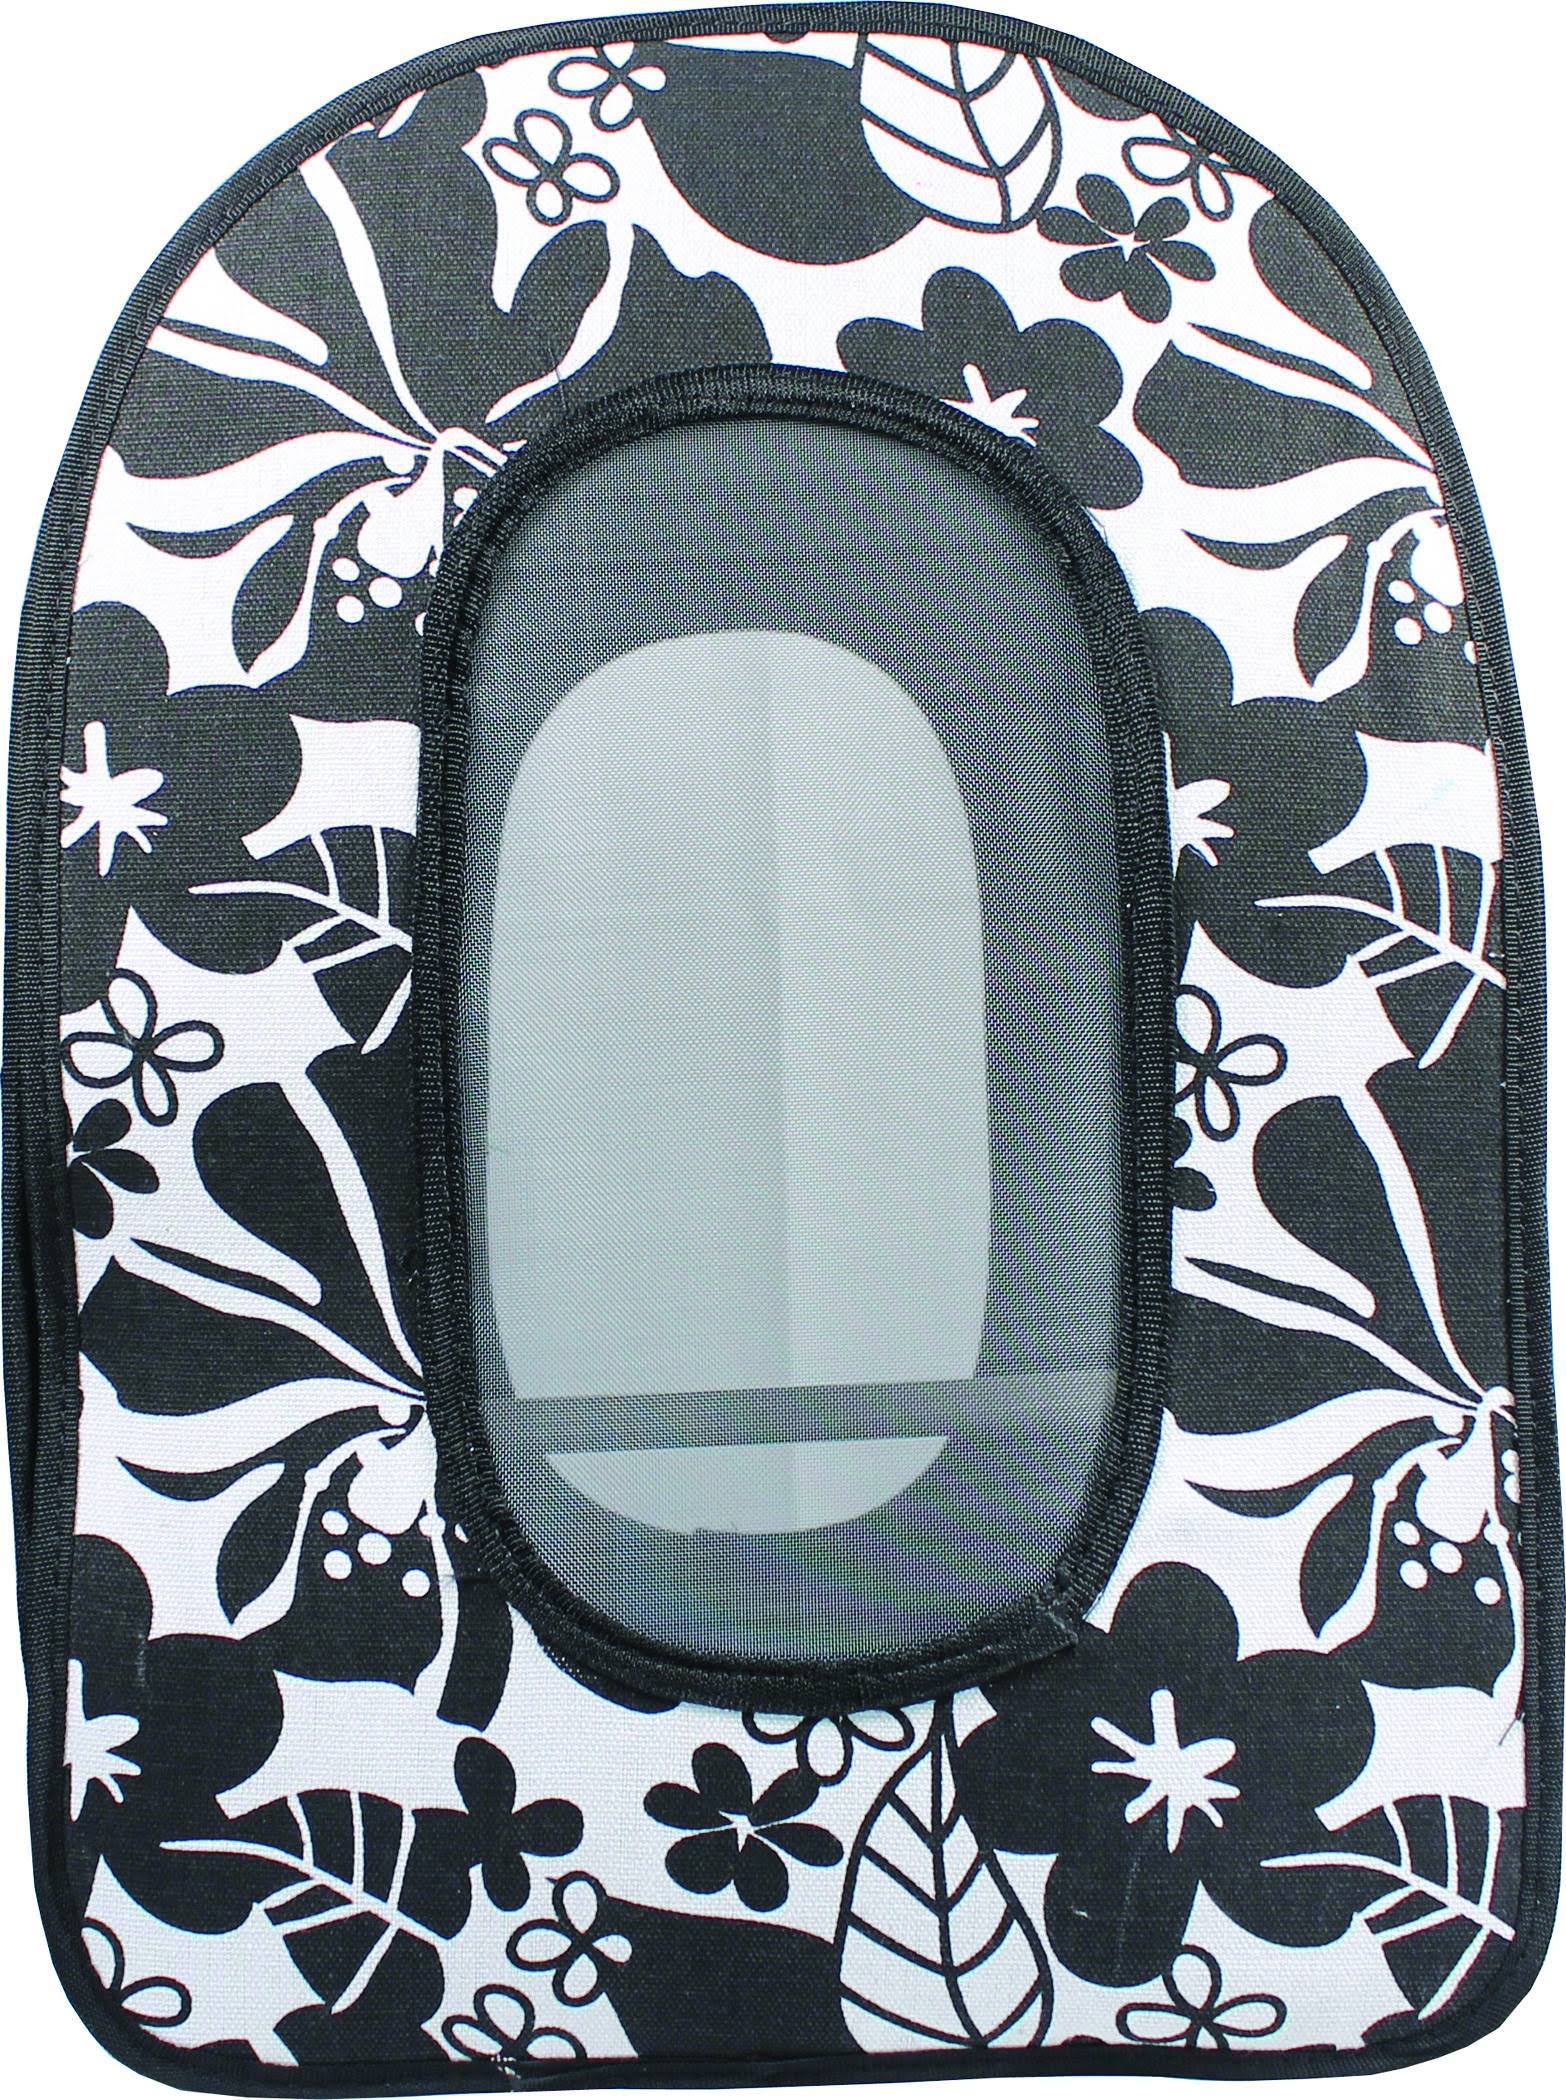 a and E Cage 001374 Happy Beaks Soft Sided Bird Travel Carrier - Black, 13.5" x 9" x 18.5"